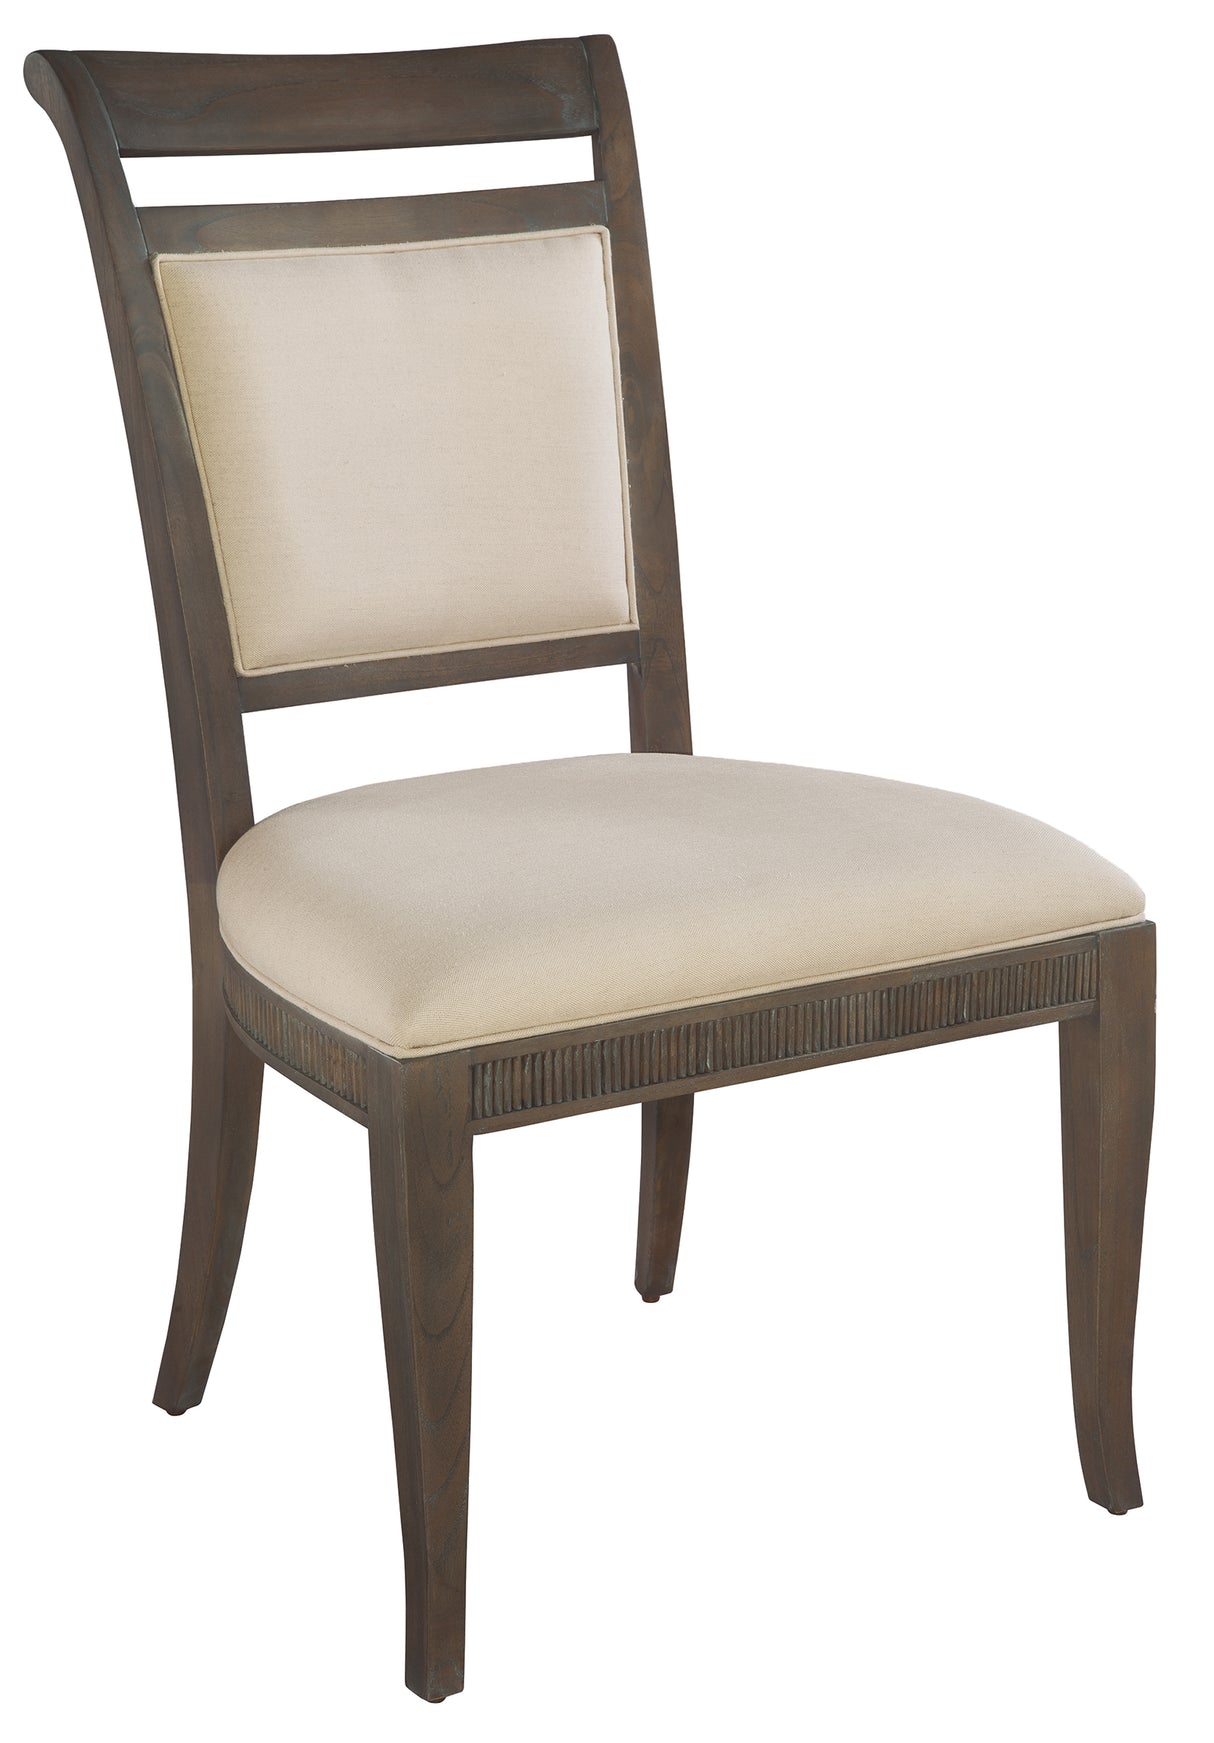 Hekman 952222SU Urban Retreat 22.25in. x 25.5in. x 39.5in. Upholstered Dining Side Chair